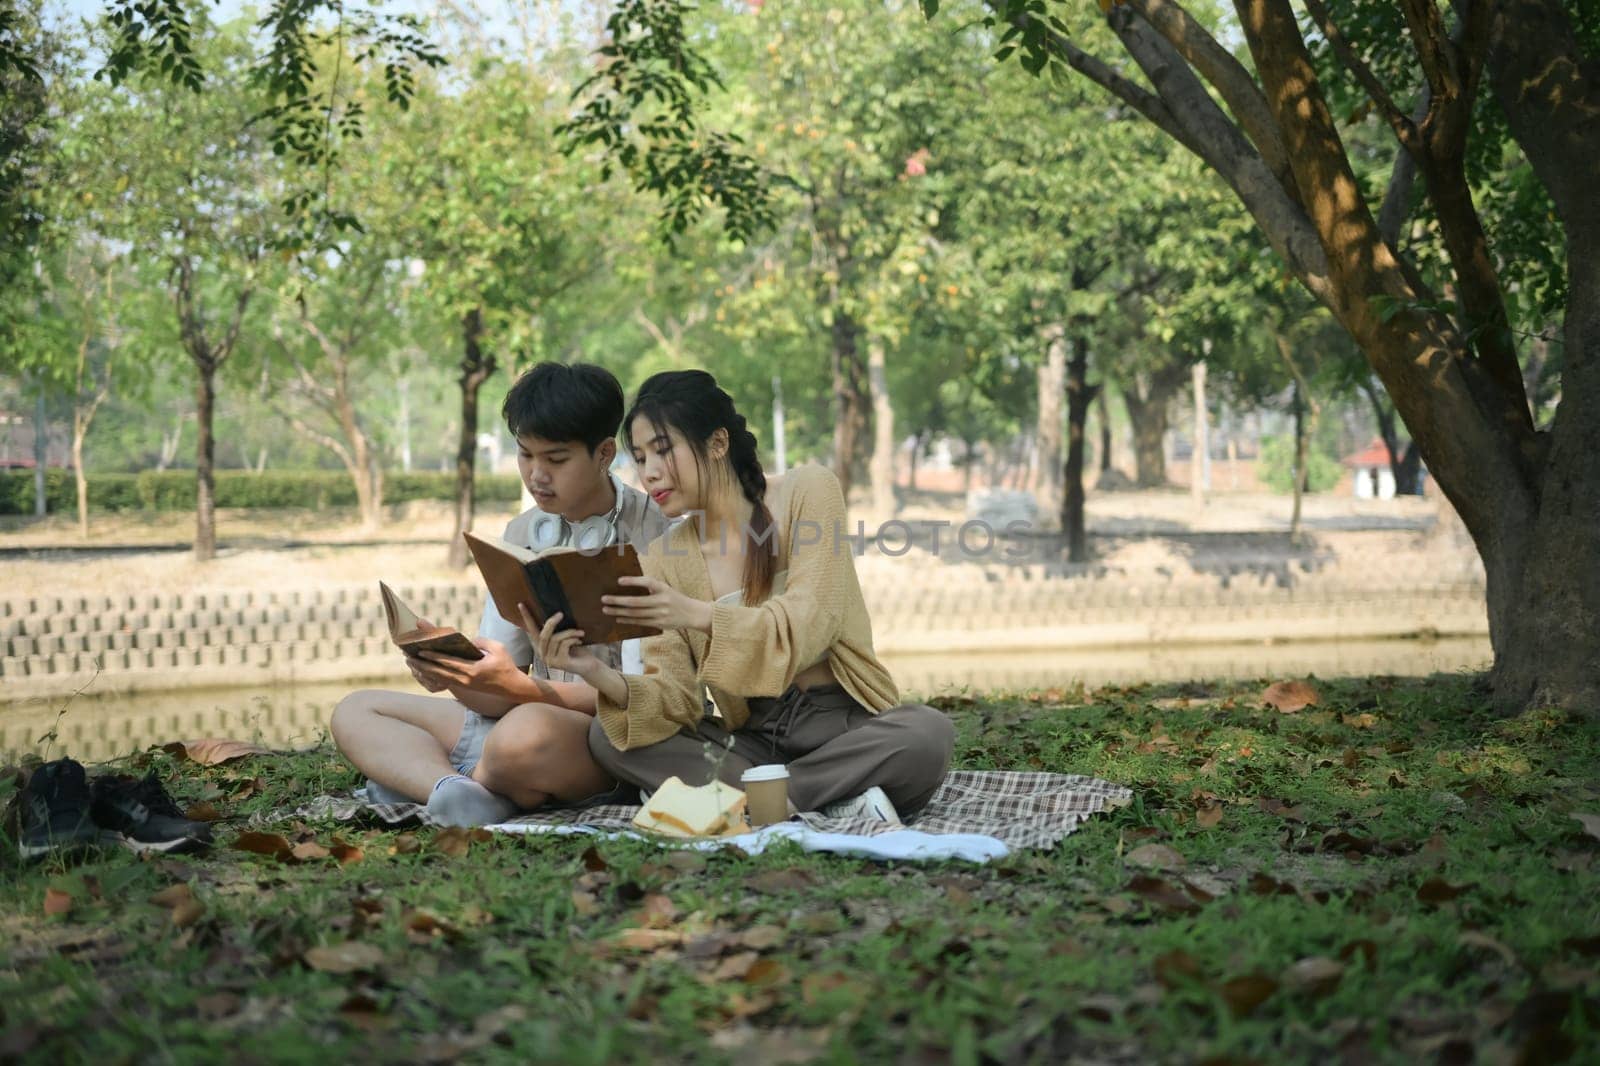 Relaxed young couple spending time together outdoor reading book on picnic blanket in the park.